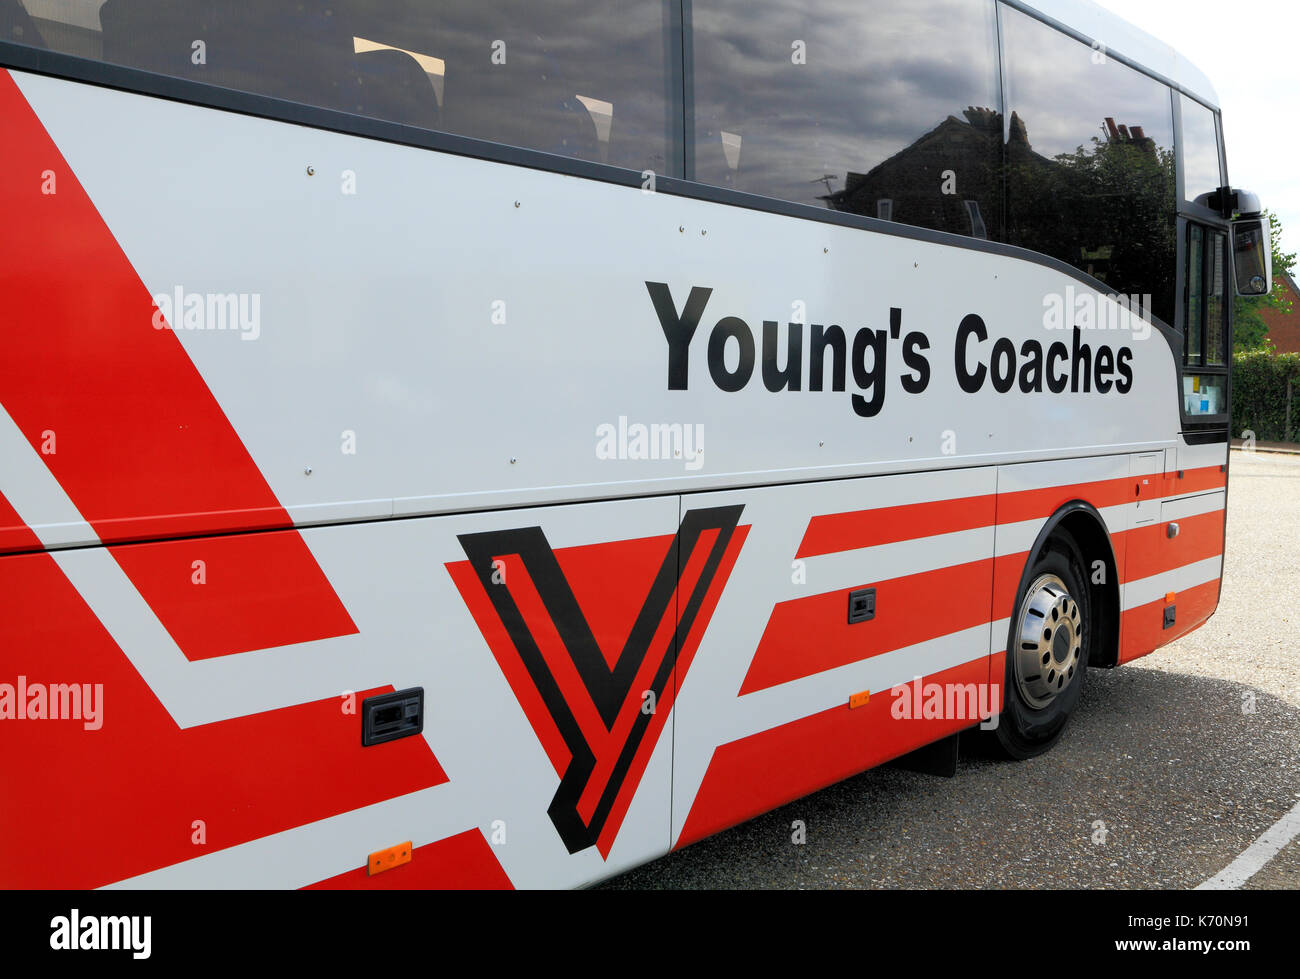 Young's Coaches, coach, day trips, trip, excursion, excursions, holiday, holidays, travel company, companies, transport, England, UK Stock Photo